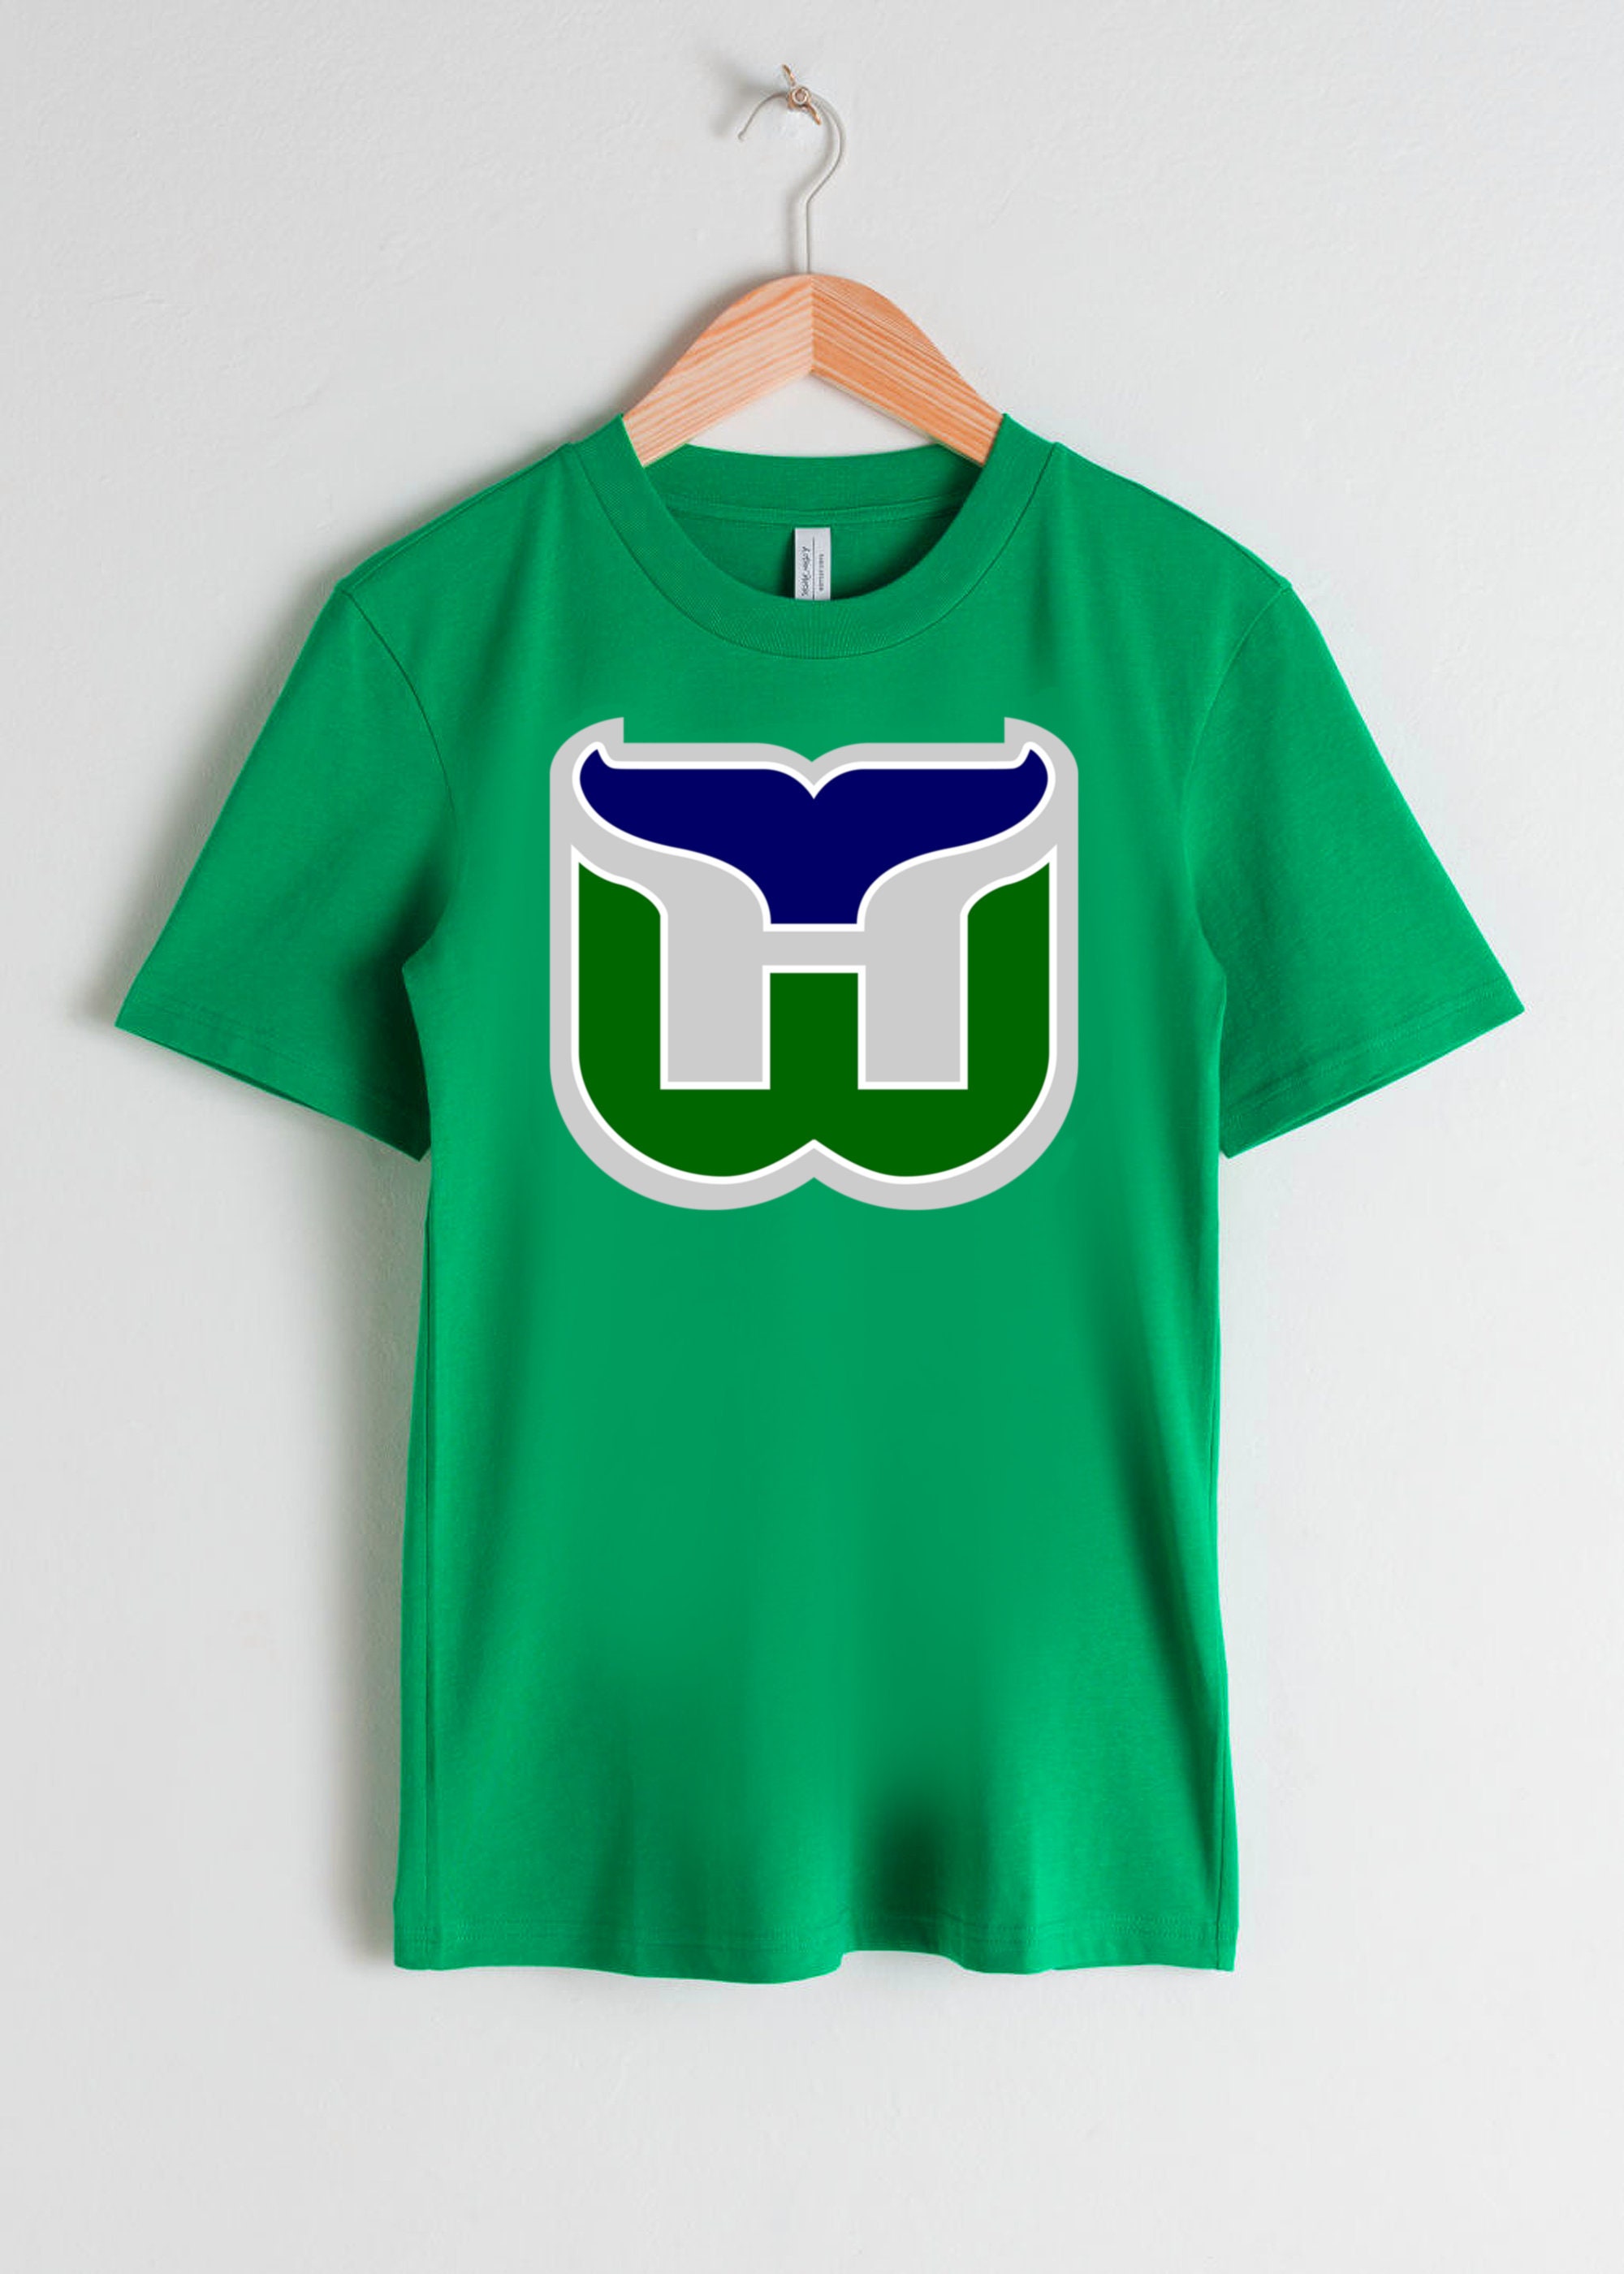 70s Vintage New England Whalers Ringer Tee Hartford Whalers 